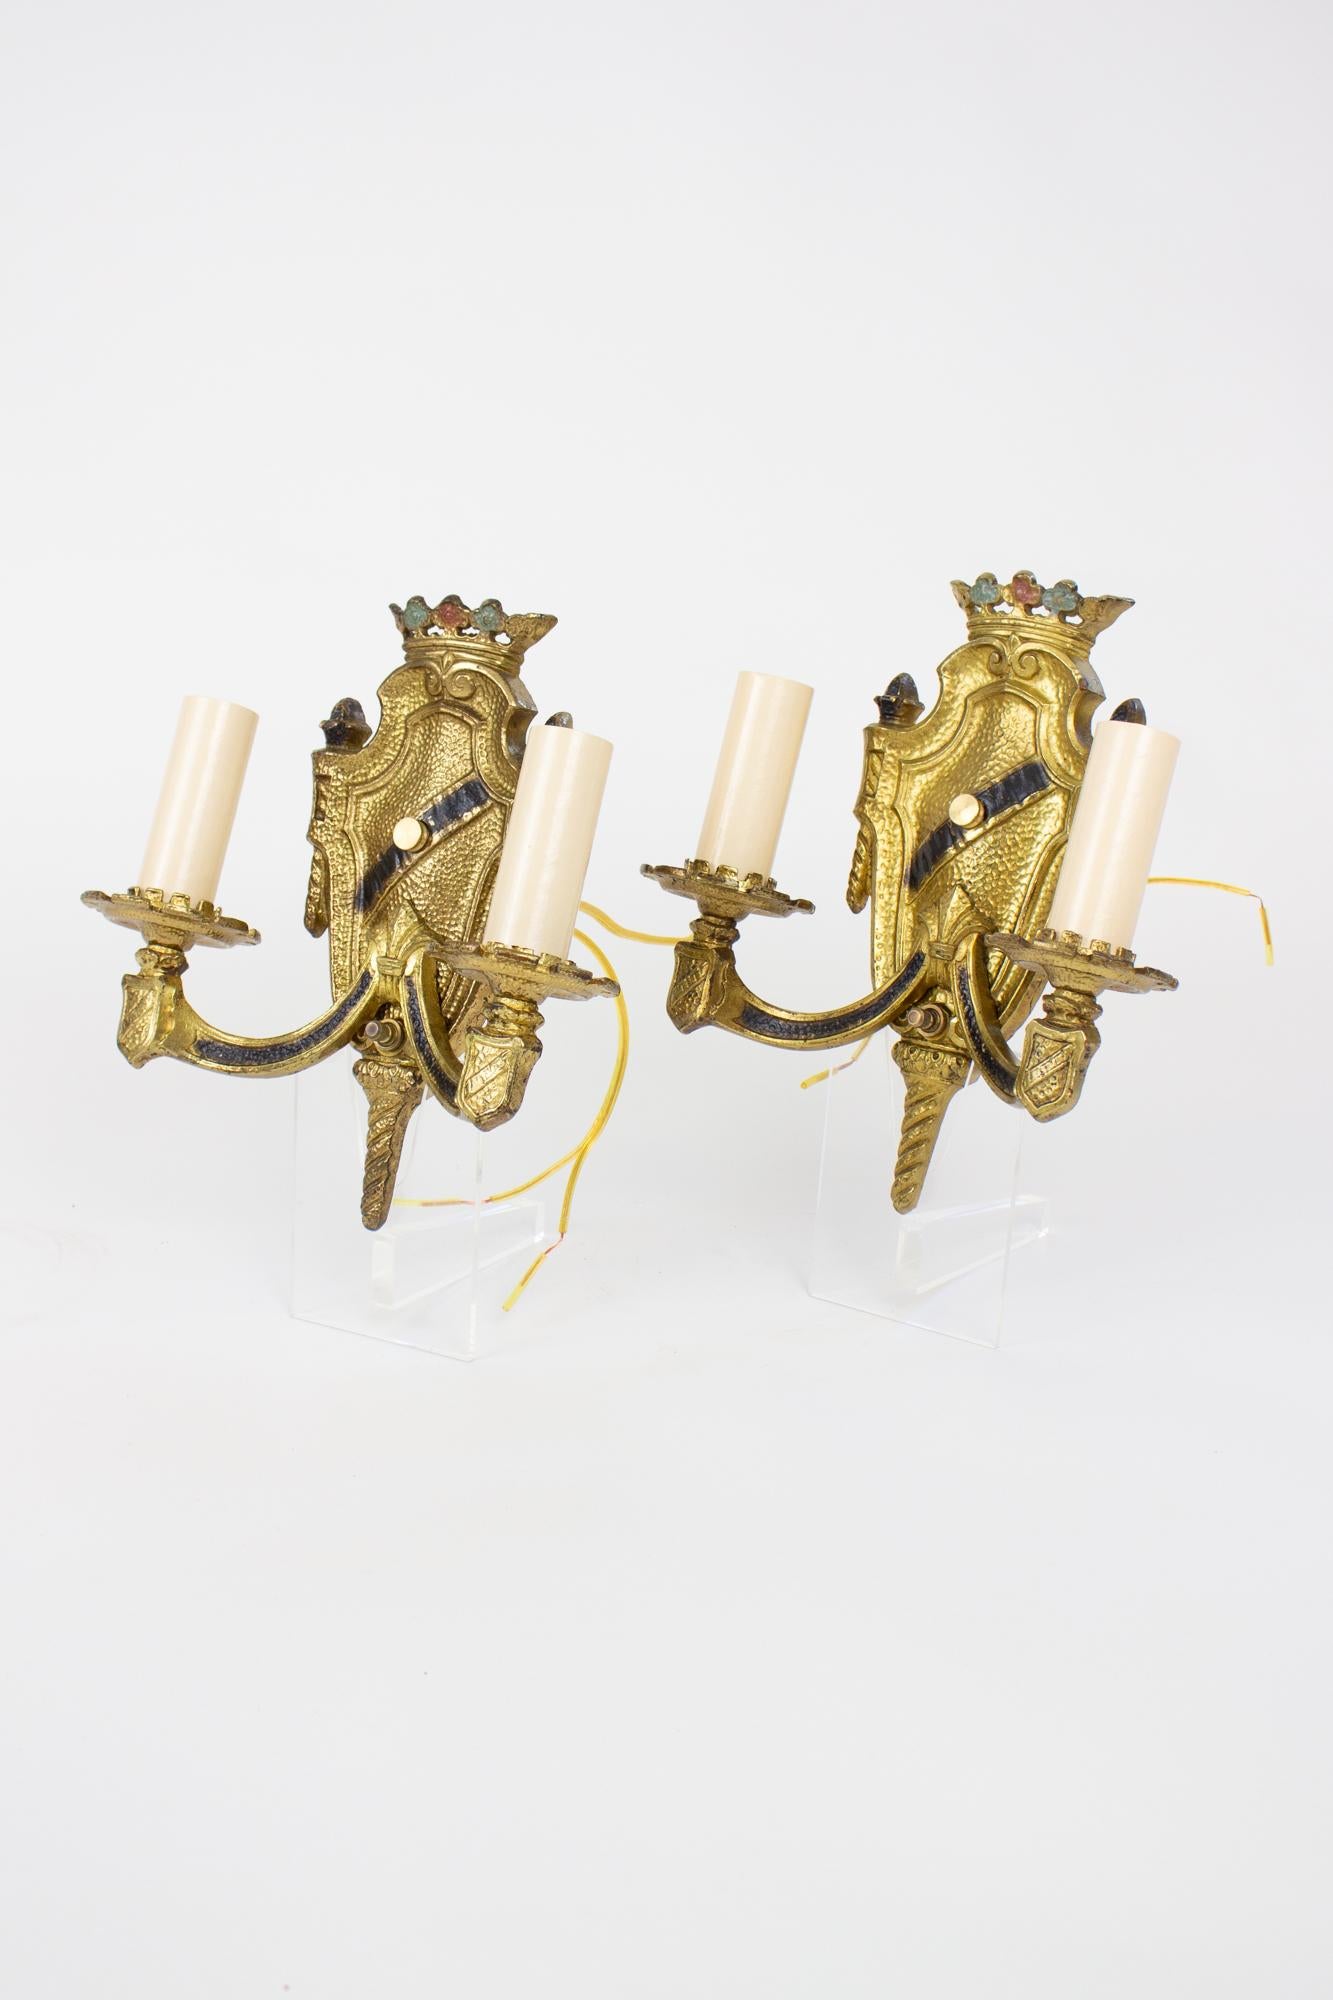 1920’s renaissance revival cast brass sconces, a pair. A lovely pair of shield form double arm sconces in cast brass with original painted polychrome accents. A crown at the top with blue and red accents. The backplate is shieldform with a black